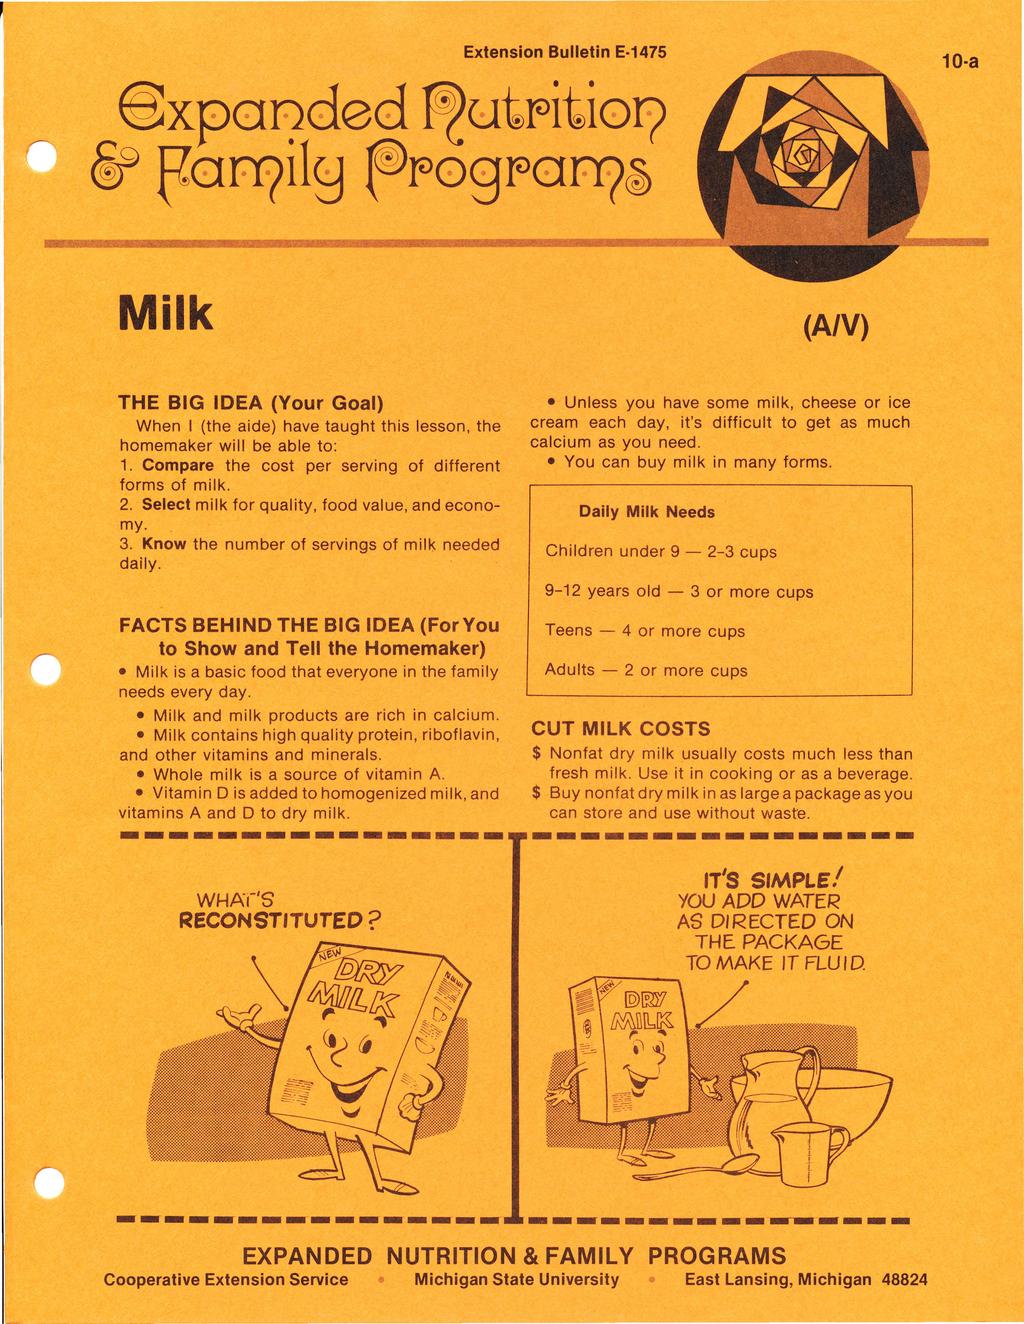 Extension Bulletin E 1475 10-a (A/V) THE BIG IDEA (Your Goal) When I (the aide) have taught this lesson, the homemaker will be able to: 1. Compare the cost per serving of different forms of milk. 2.